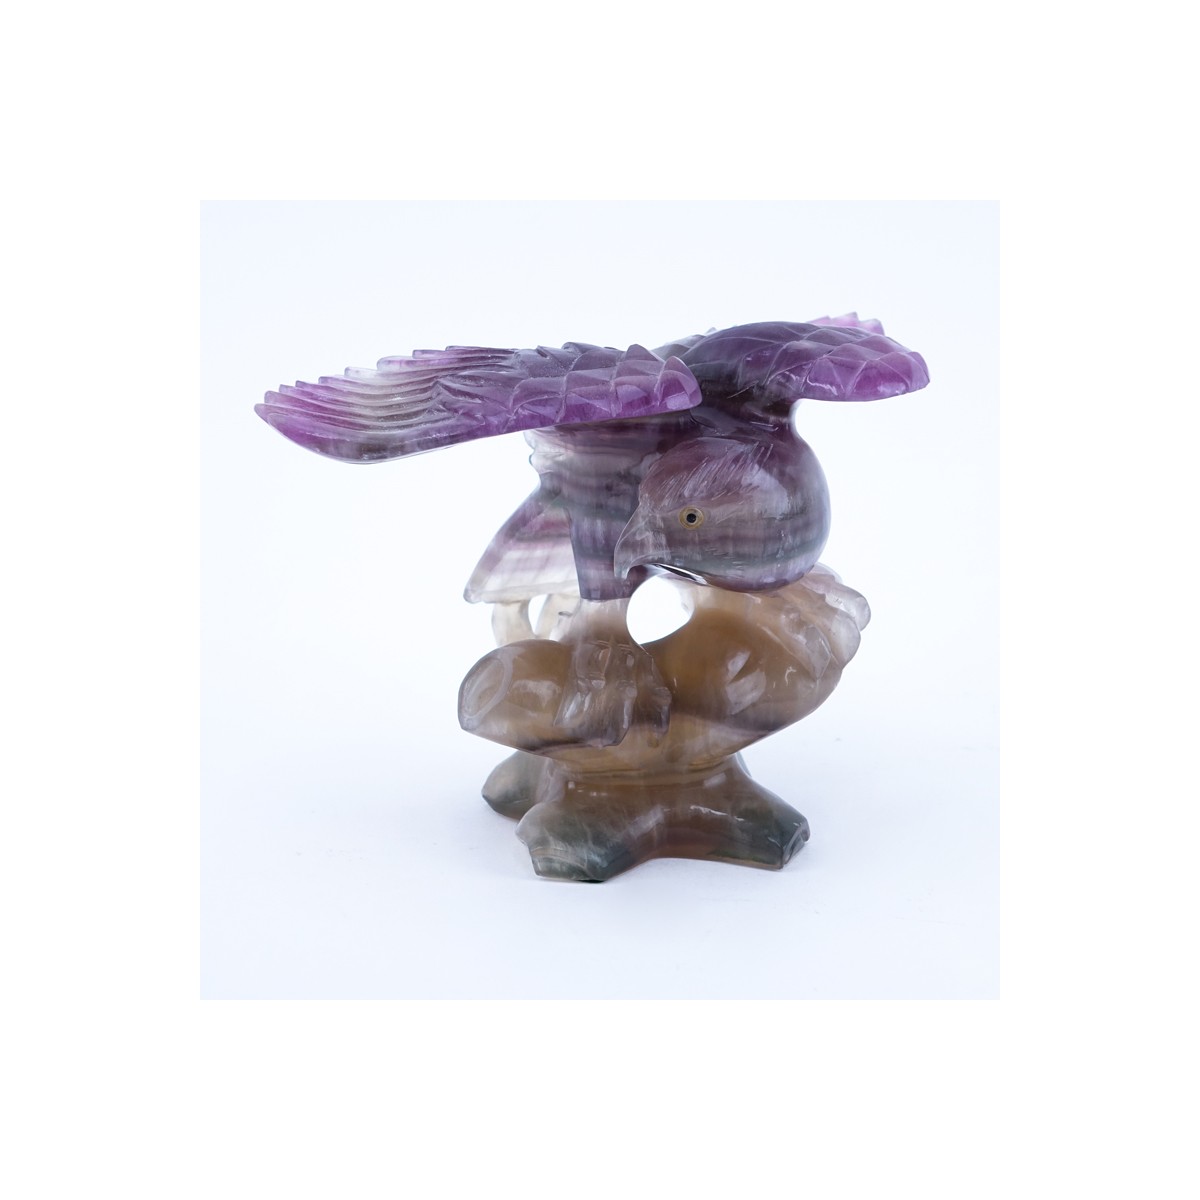 Amethyst Carved Sculpture of a Eagle Perched on Branch. A few nic